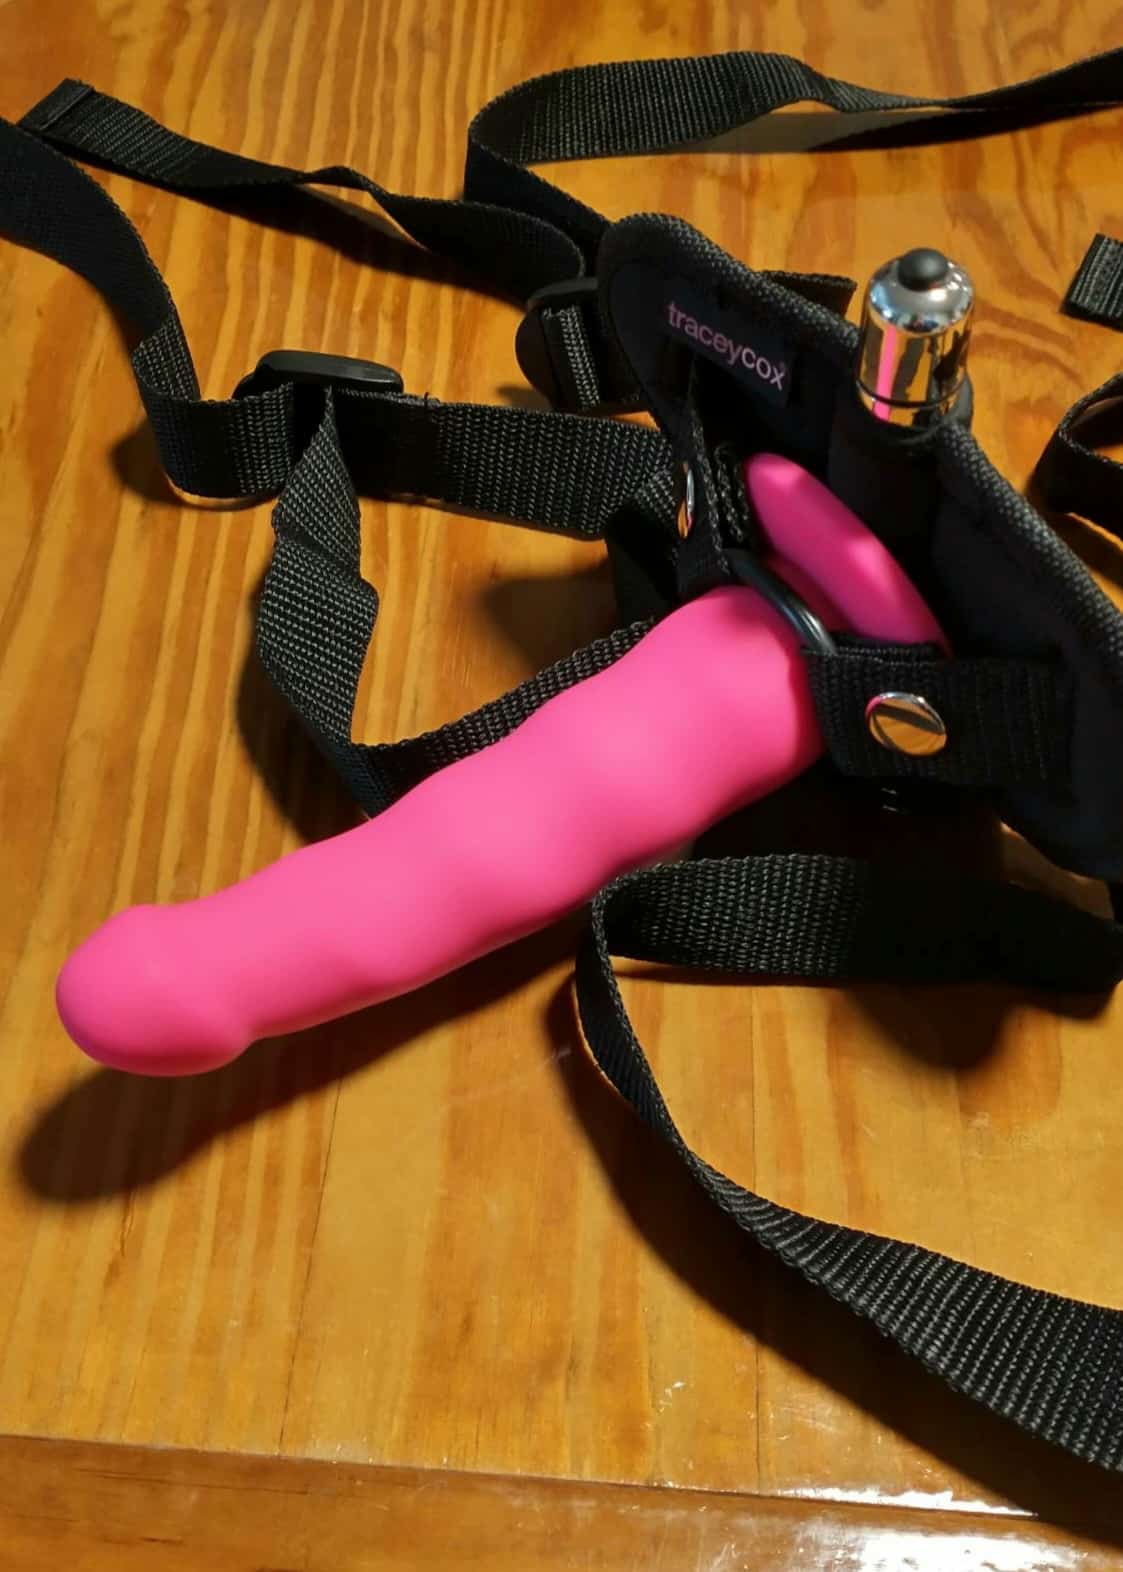 Tracey Cox Supersex Strap-On Dildos. Slide 3